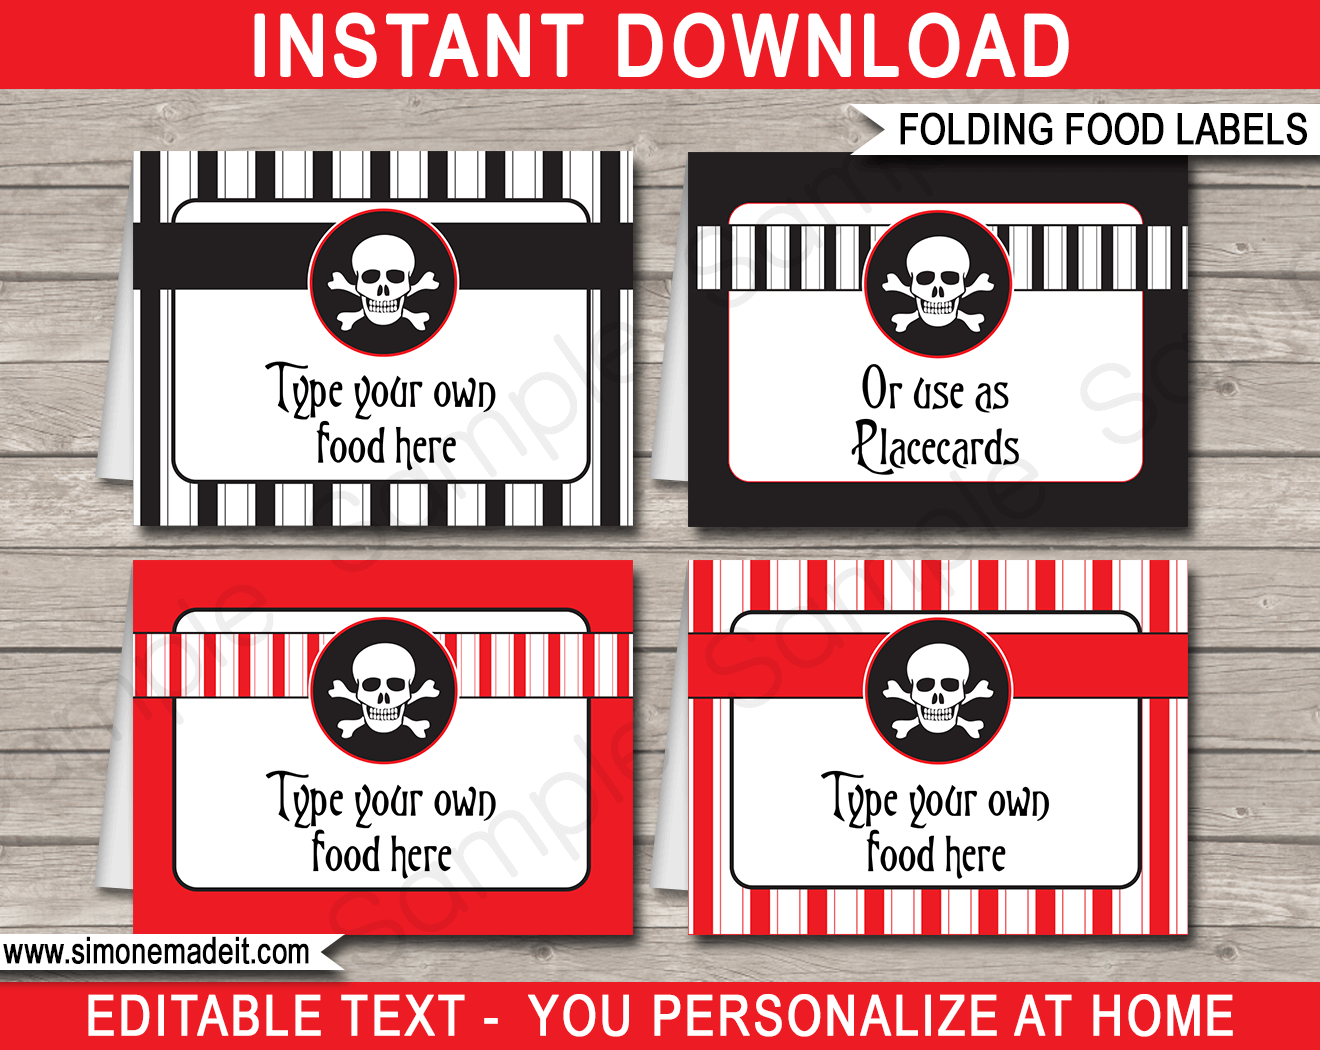 place-cards-instant-download-editable-pdf-file-pirate-birthday-decor